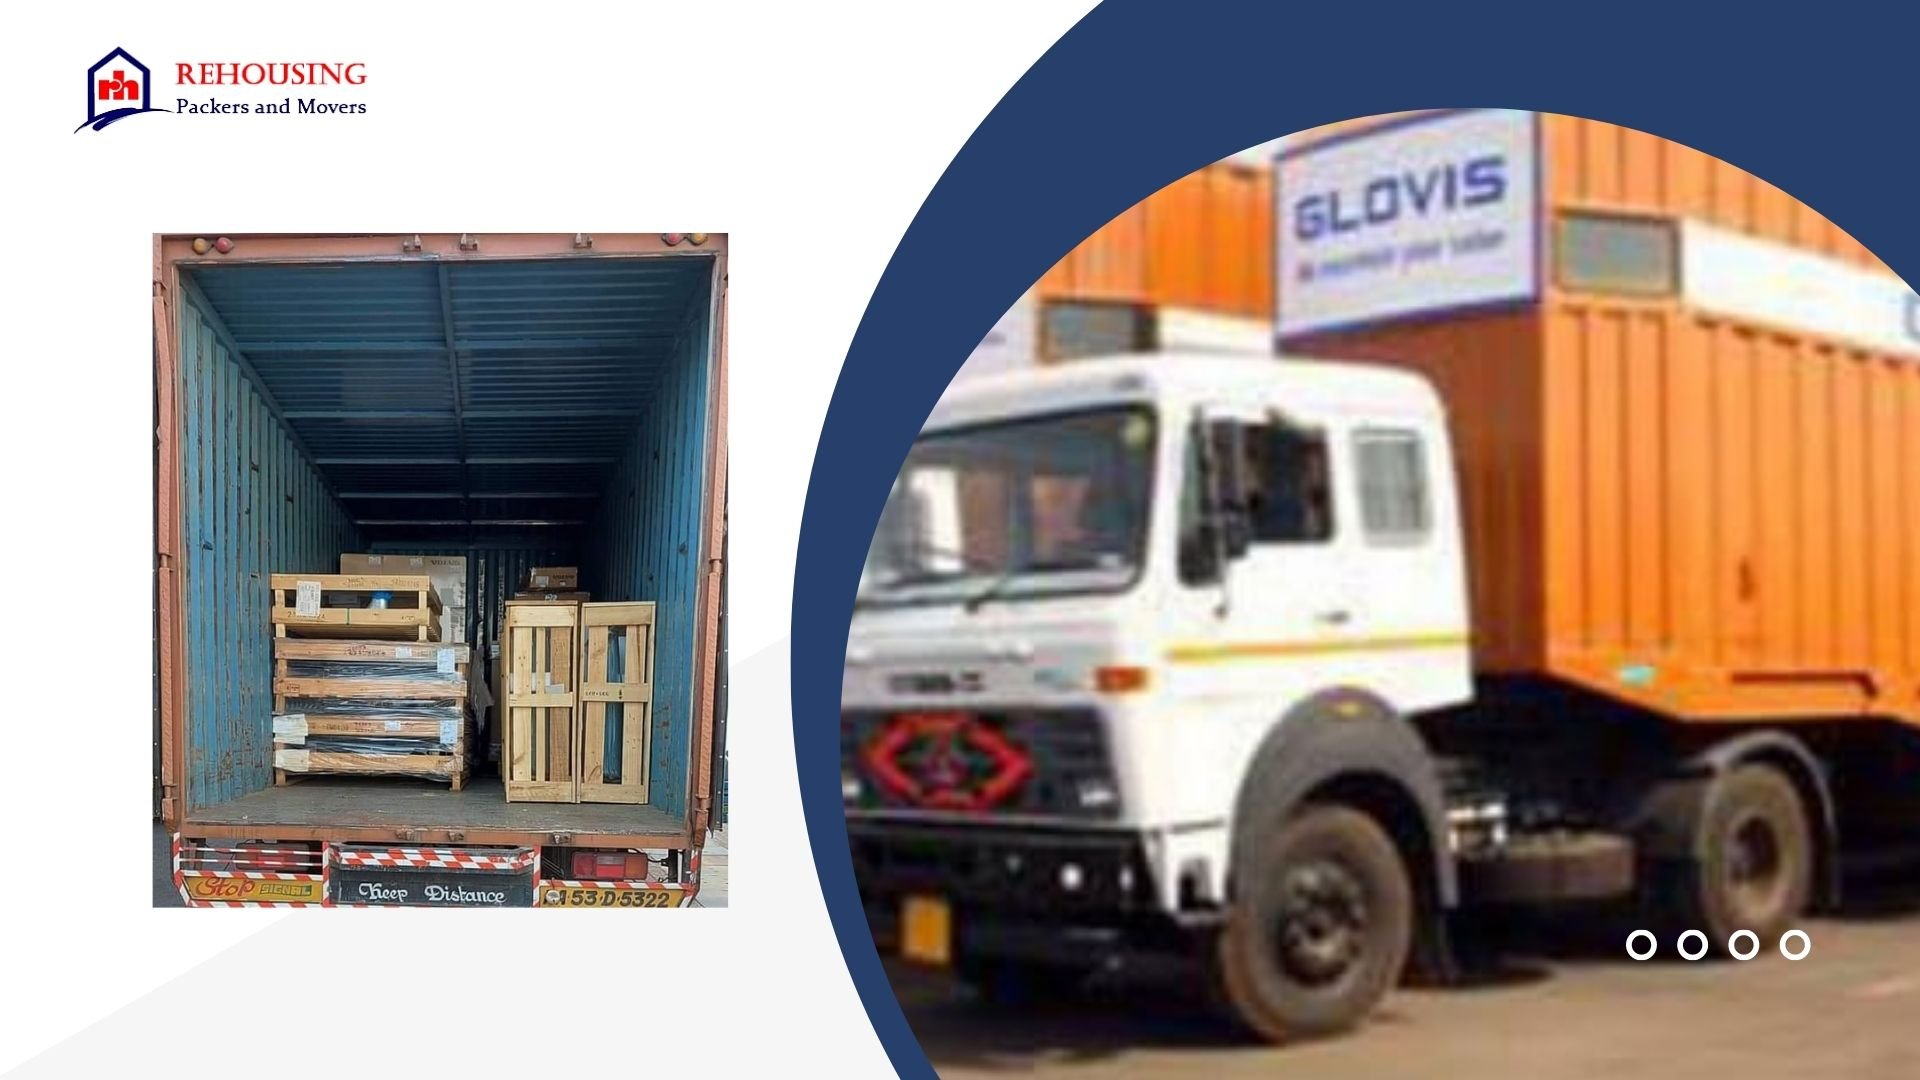 Packers and Movers From Dehradun to Noida | Rehousing packers and movers